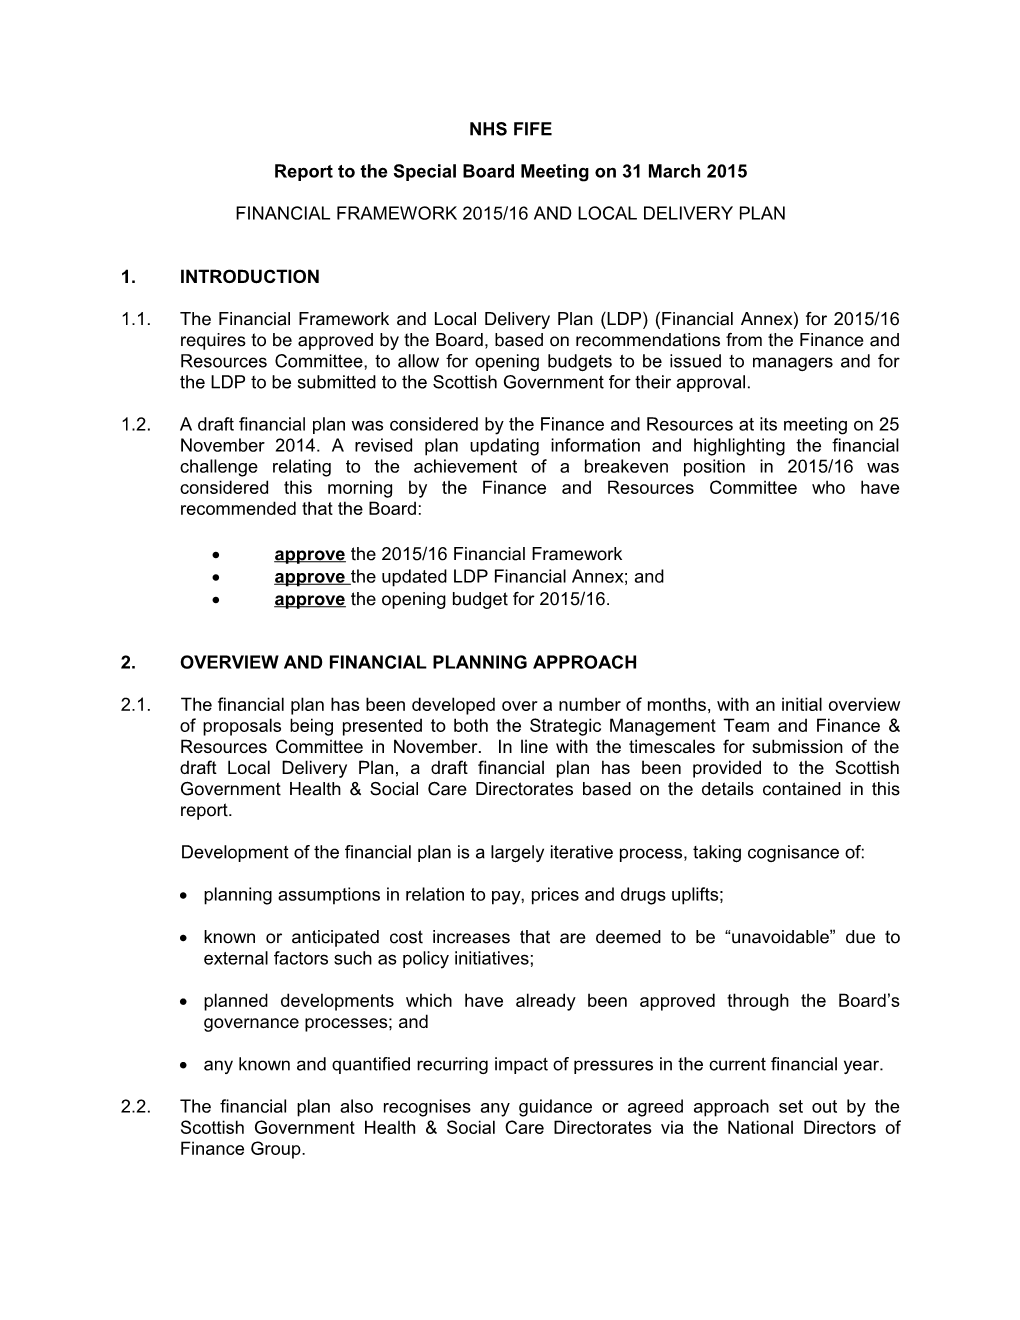 Report to the Special Board Meeting on 31 March 2015